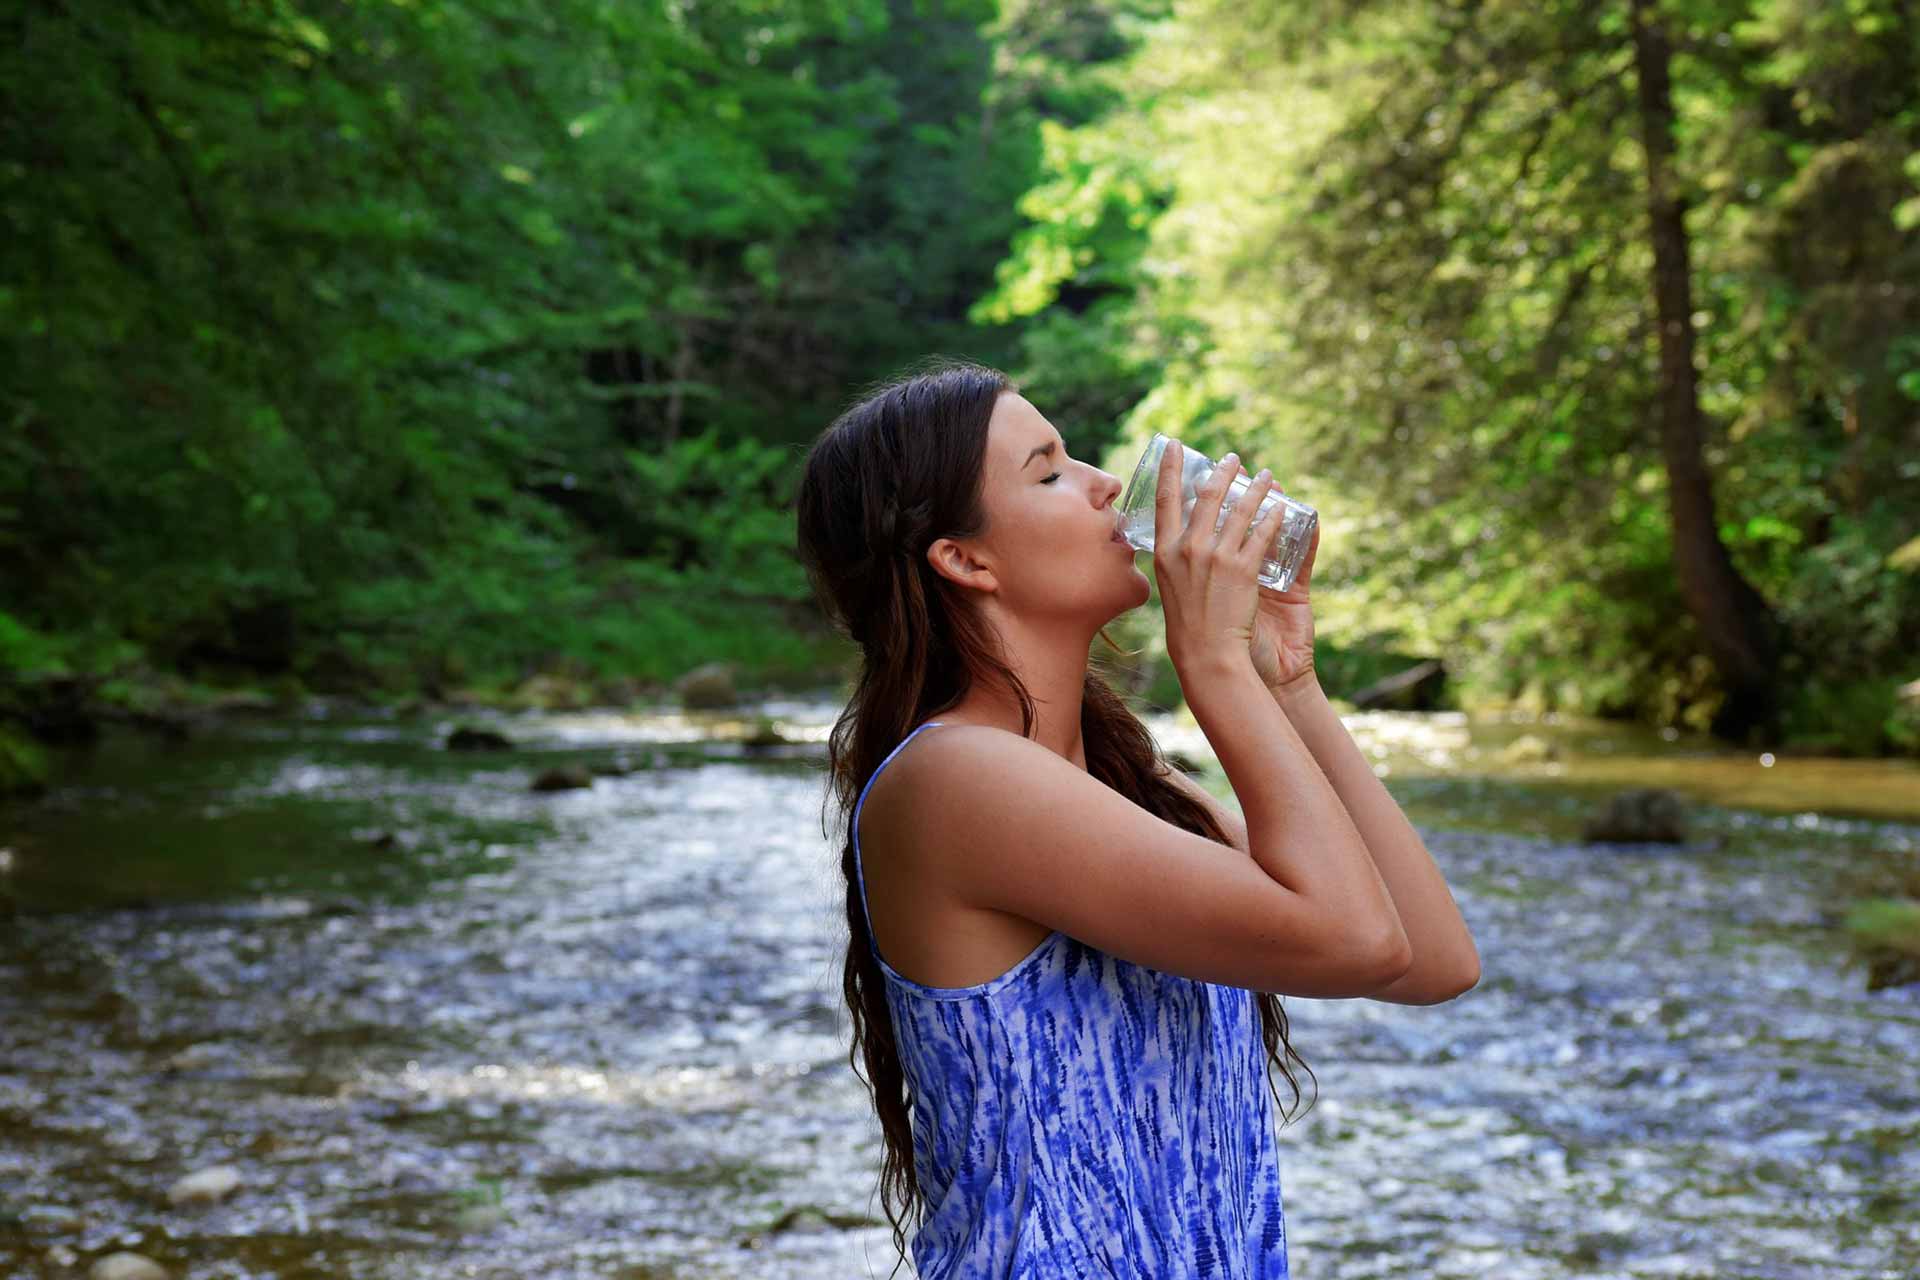 Drinking quality water from nature